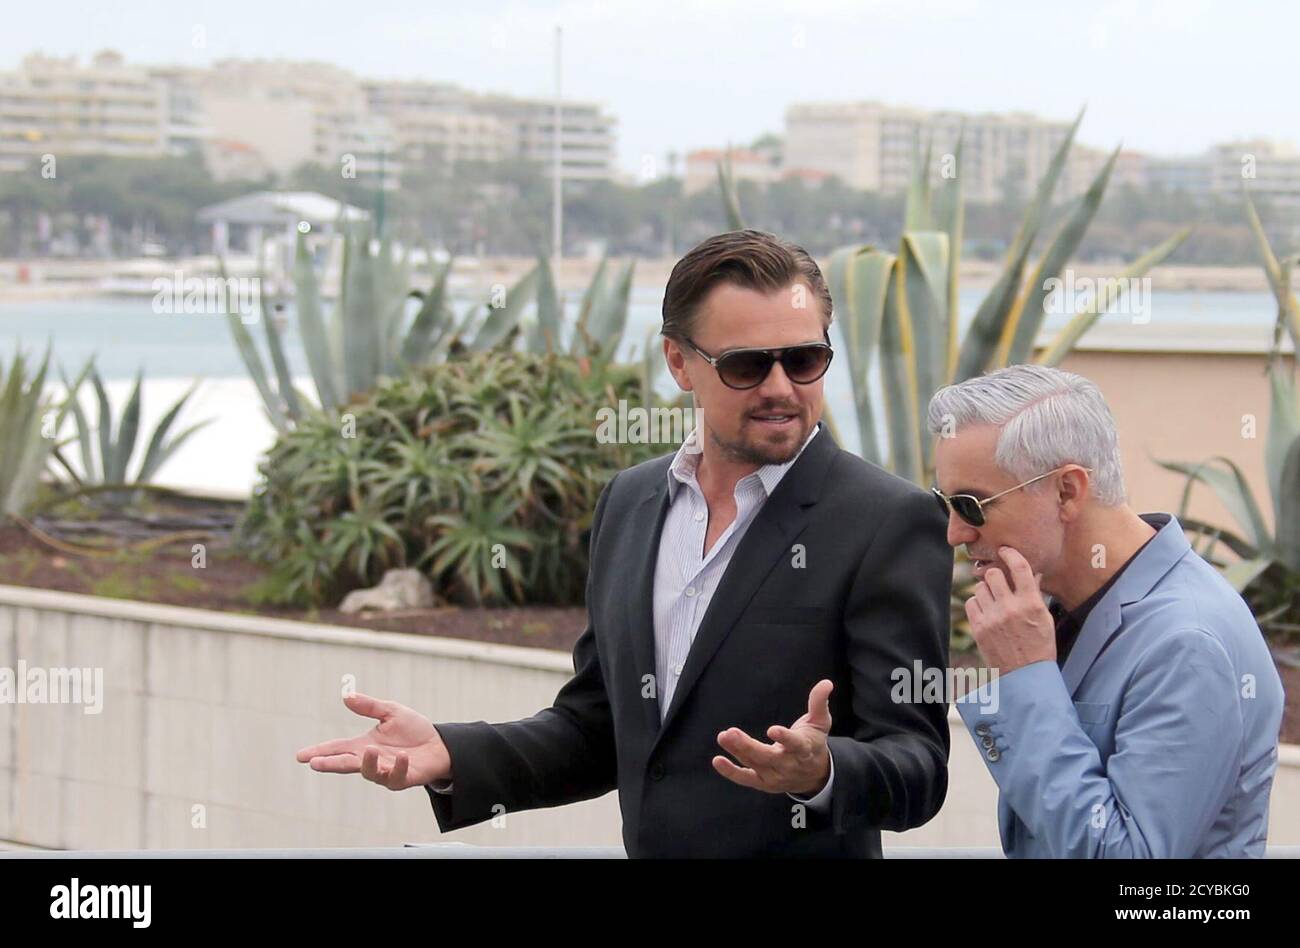 Director Baz Luhrmann (R) and cast member Leonardo DiCaprio leave after a  photocall for the film 'The Great Gatsby' before the opening of the 66th  Cannes Film Festival in Cannes May 15,